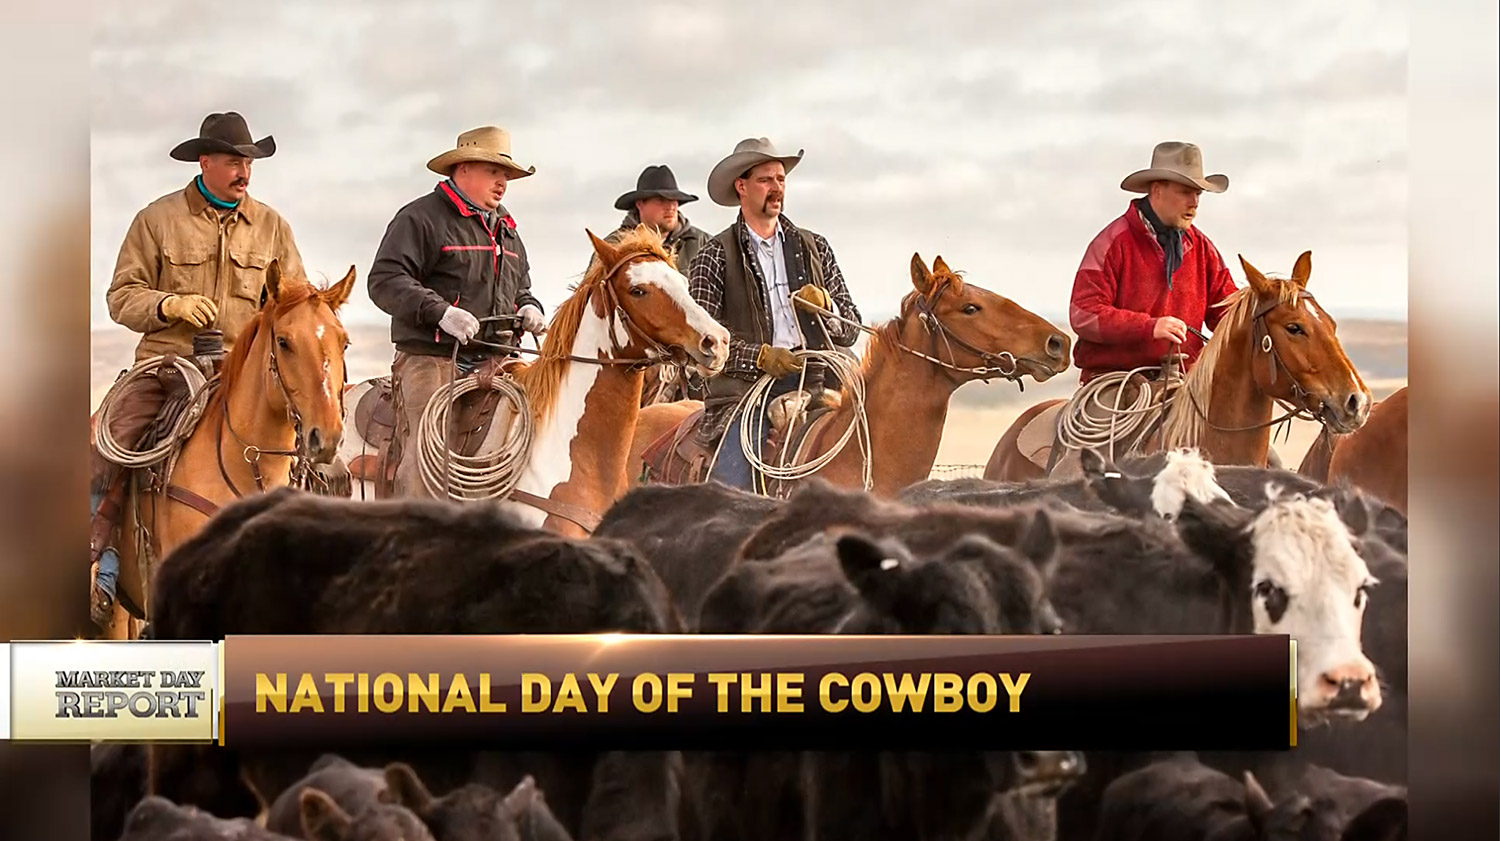 RFD-TV interviews me about National Day of the Cowboy